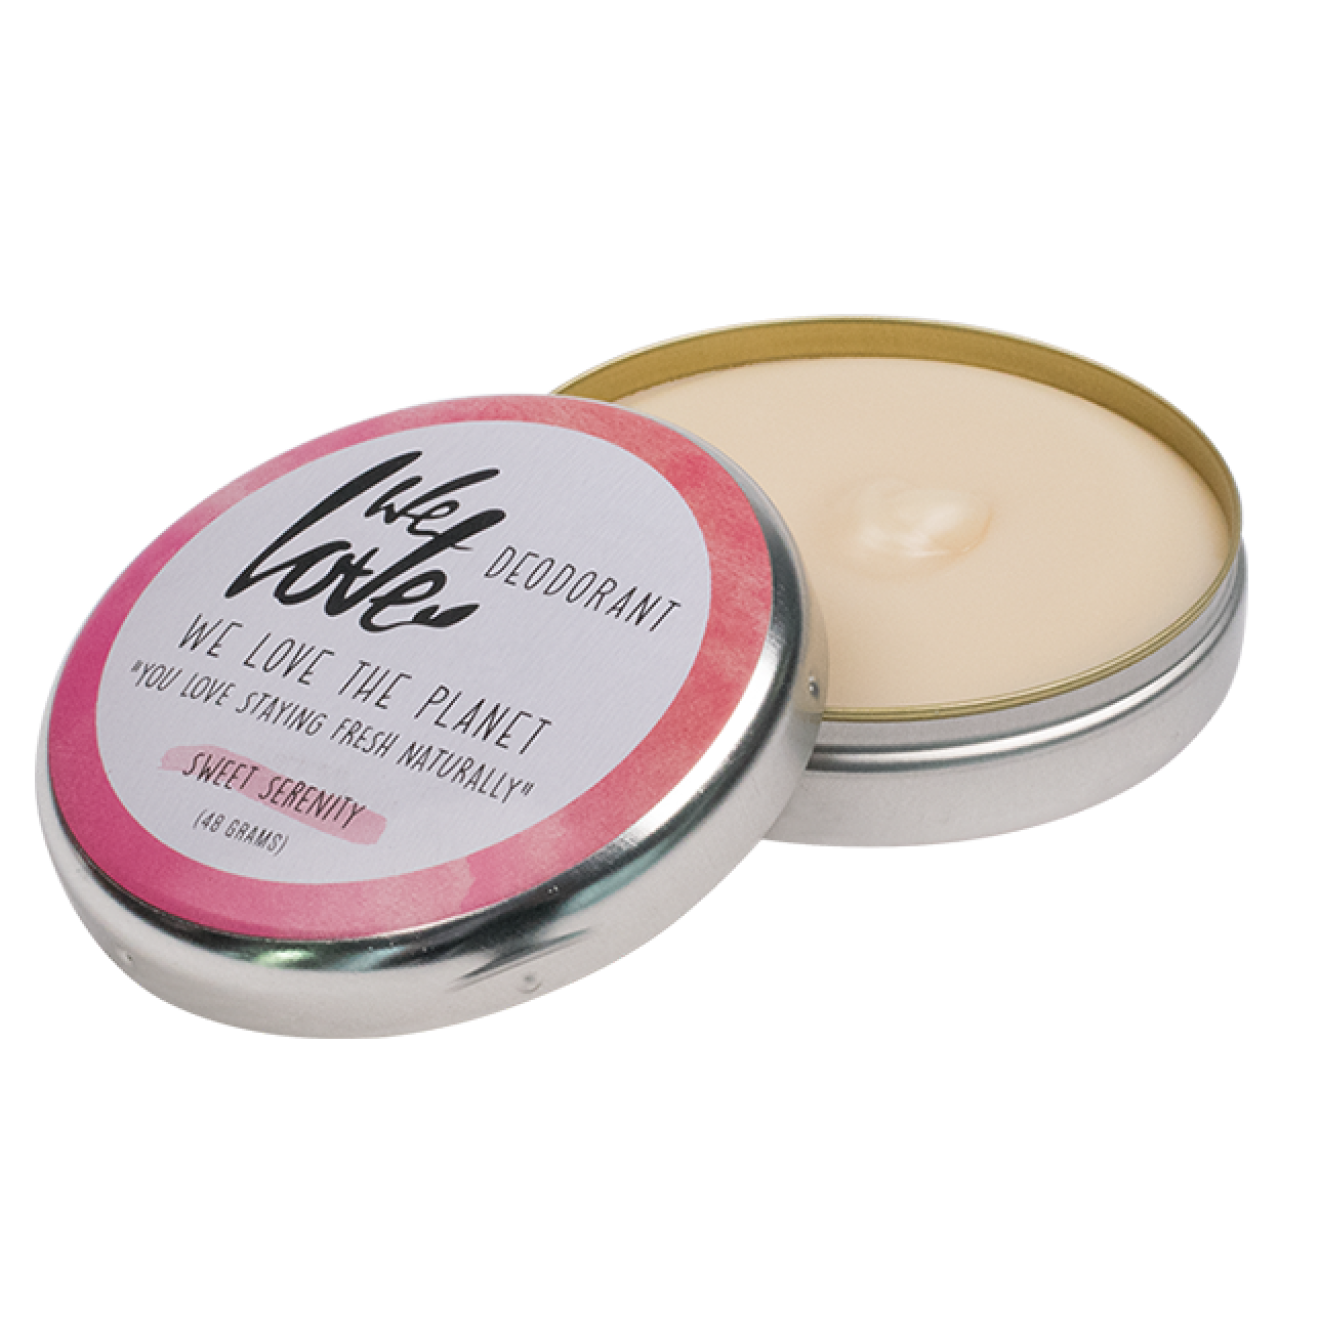 We love the Planet Deocreme Sweet Serenity 48 g